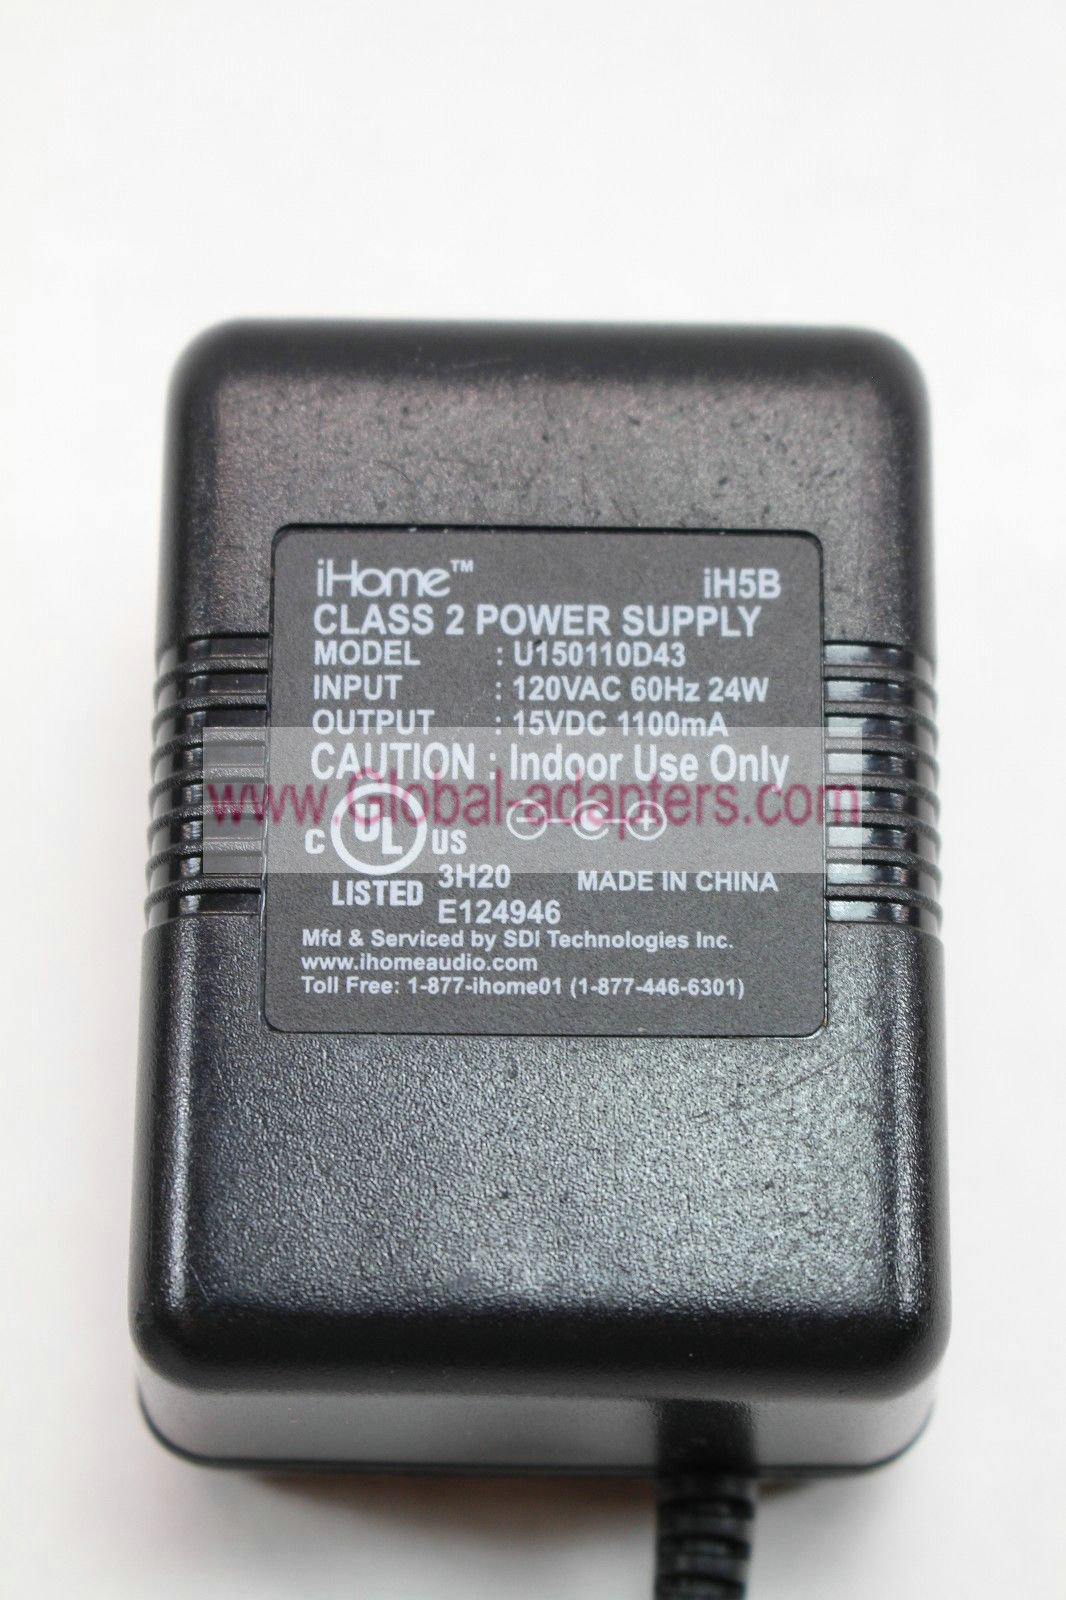 New iHome Ih5 AC Adapter Class 2 Power Supply 15 VDC 1100ma U150110D43 Power Supply - Click Image to Close